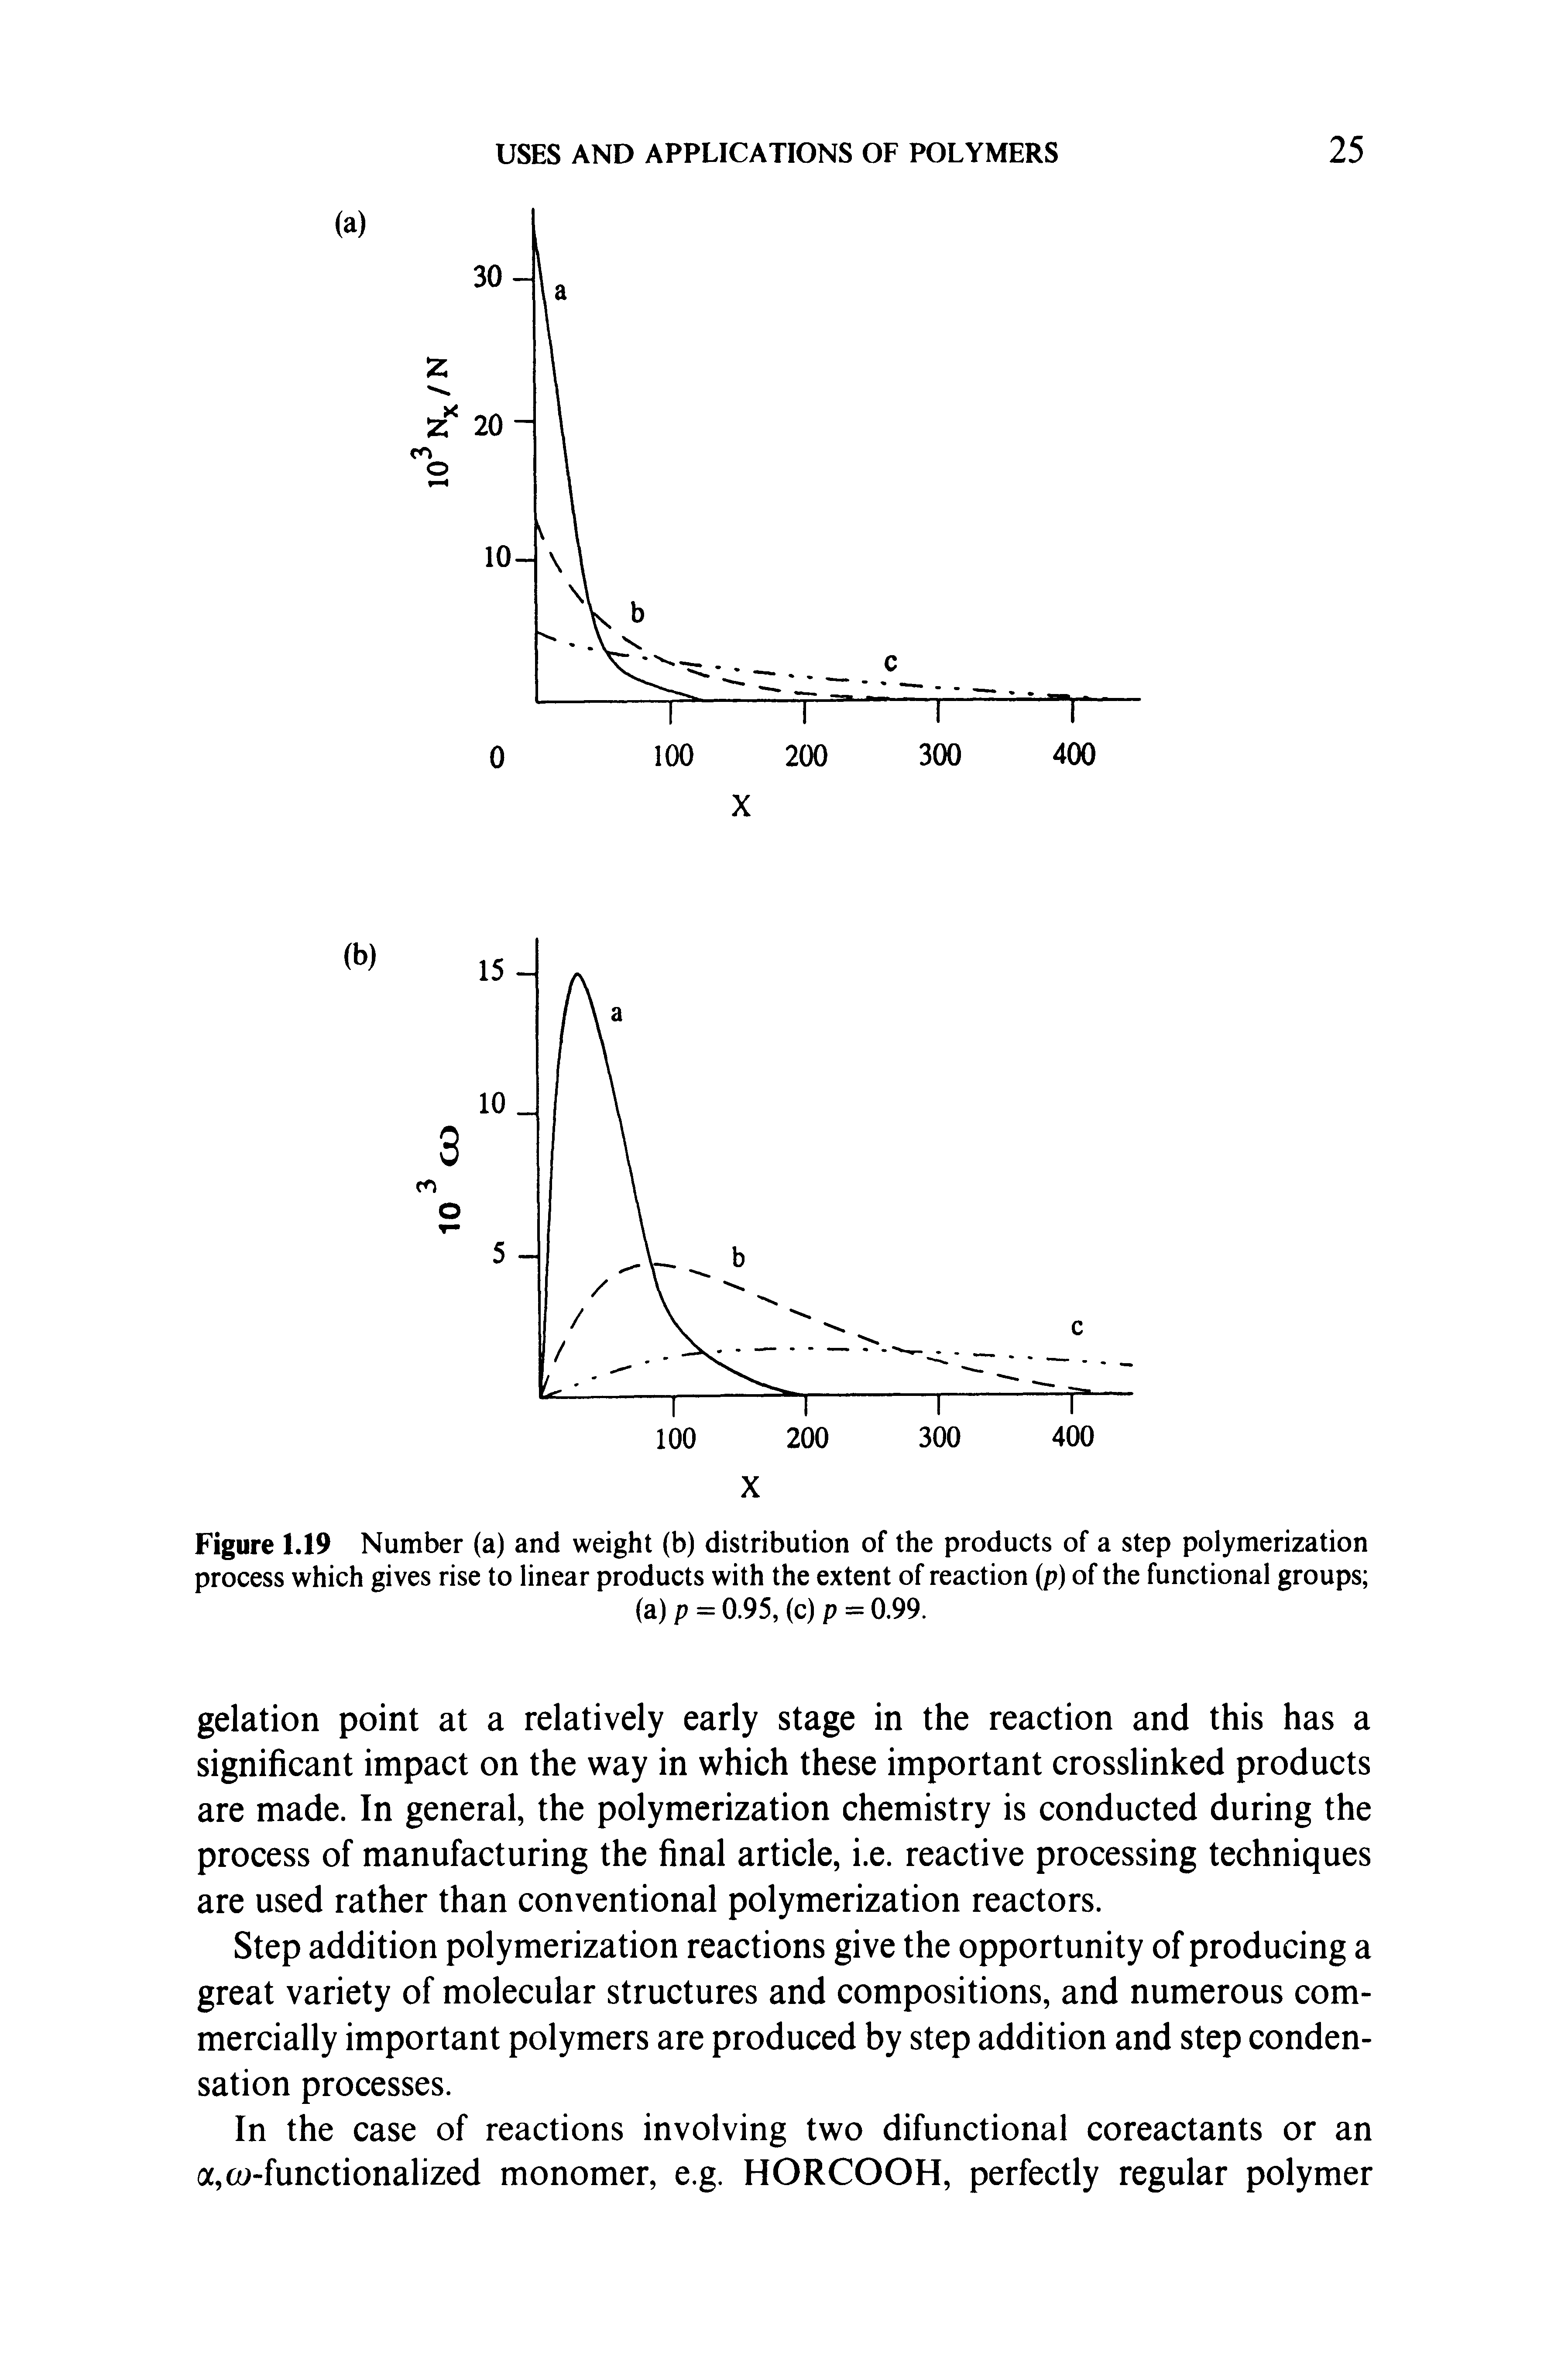 Figure 1.19 Number (a) and weight (b) distribution of the products of a step polymerization process which gives rise to linear products with the extent of reaction (p) of the functional groups ...